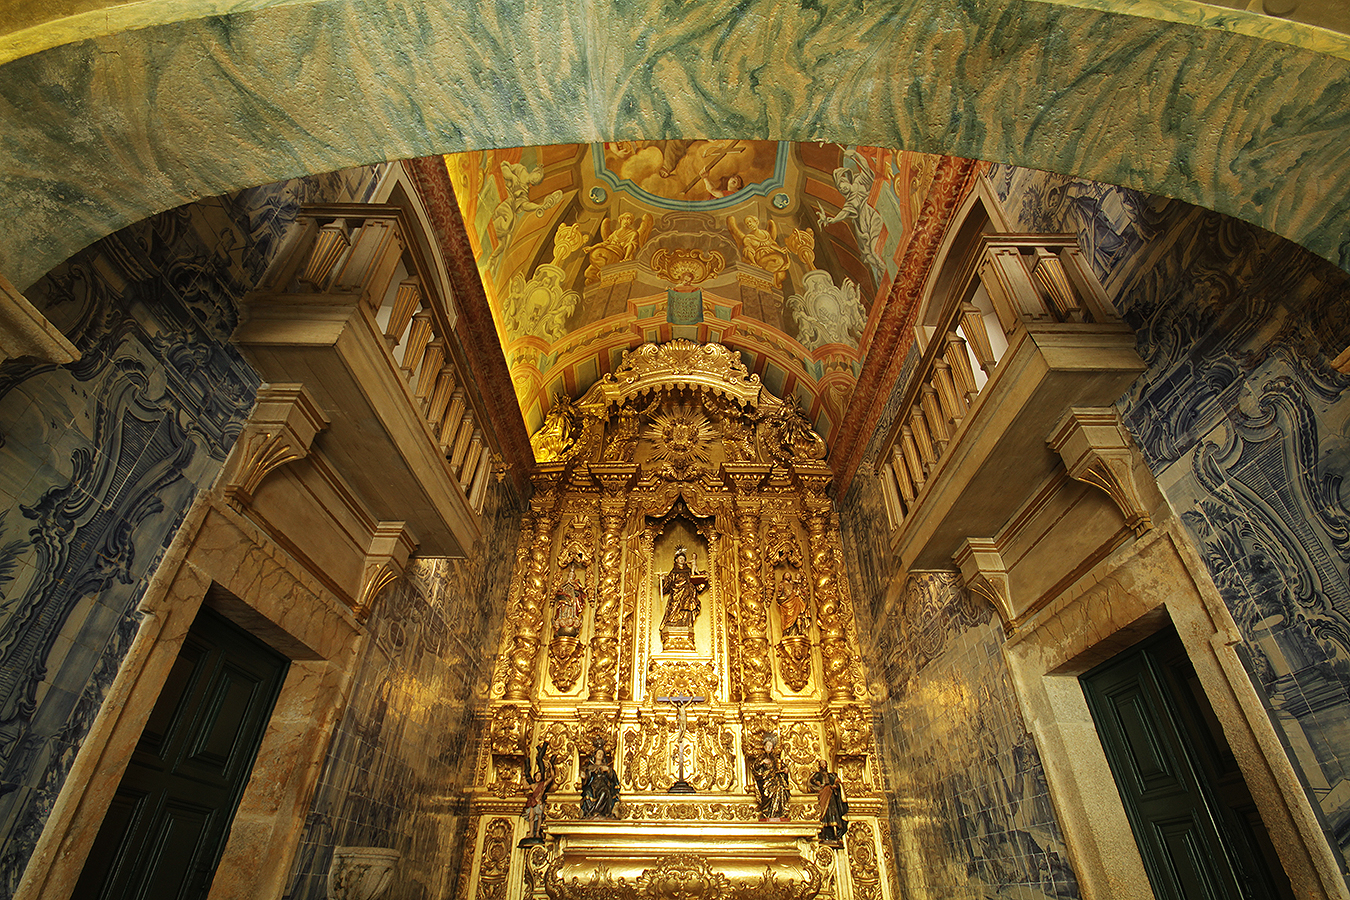  Wood and Gold: the luxury of religious art